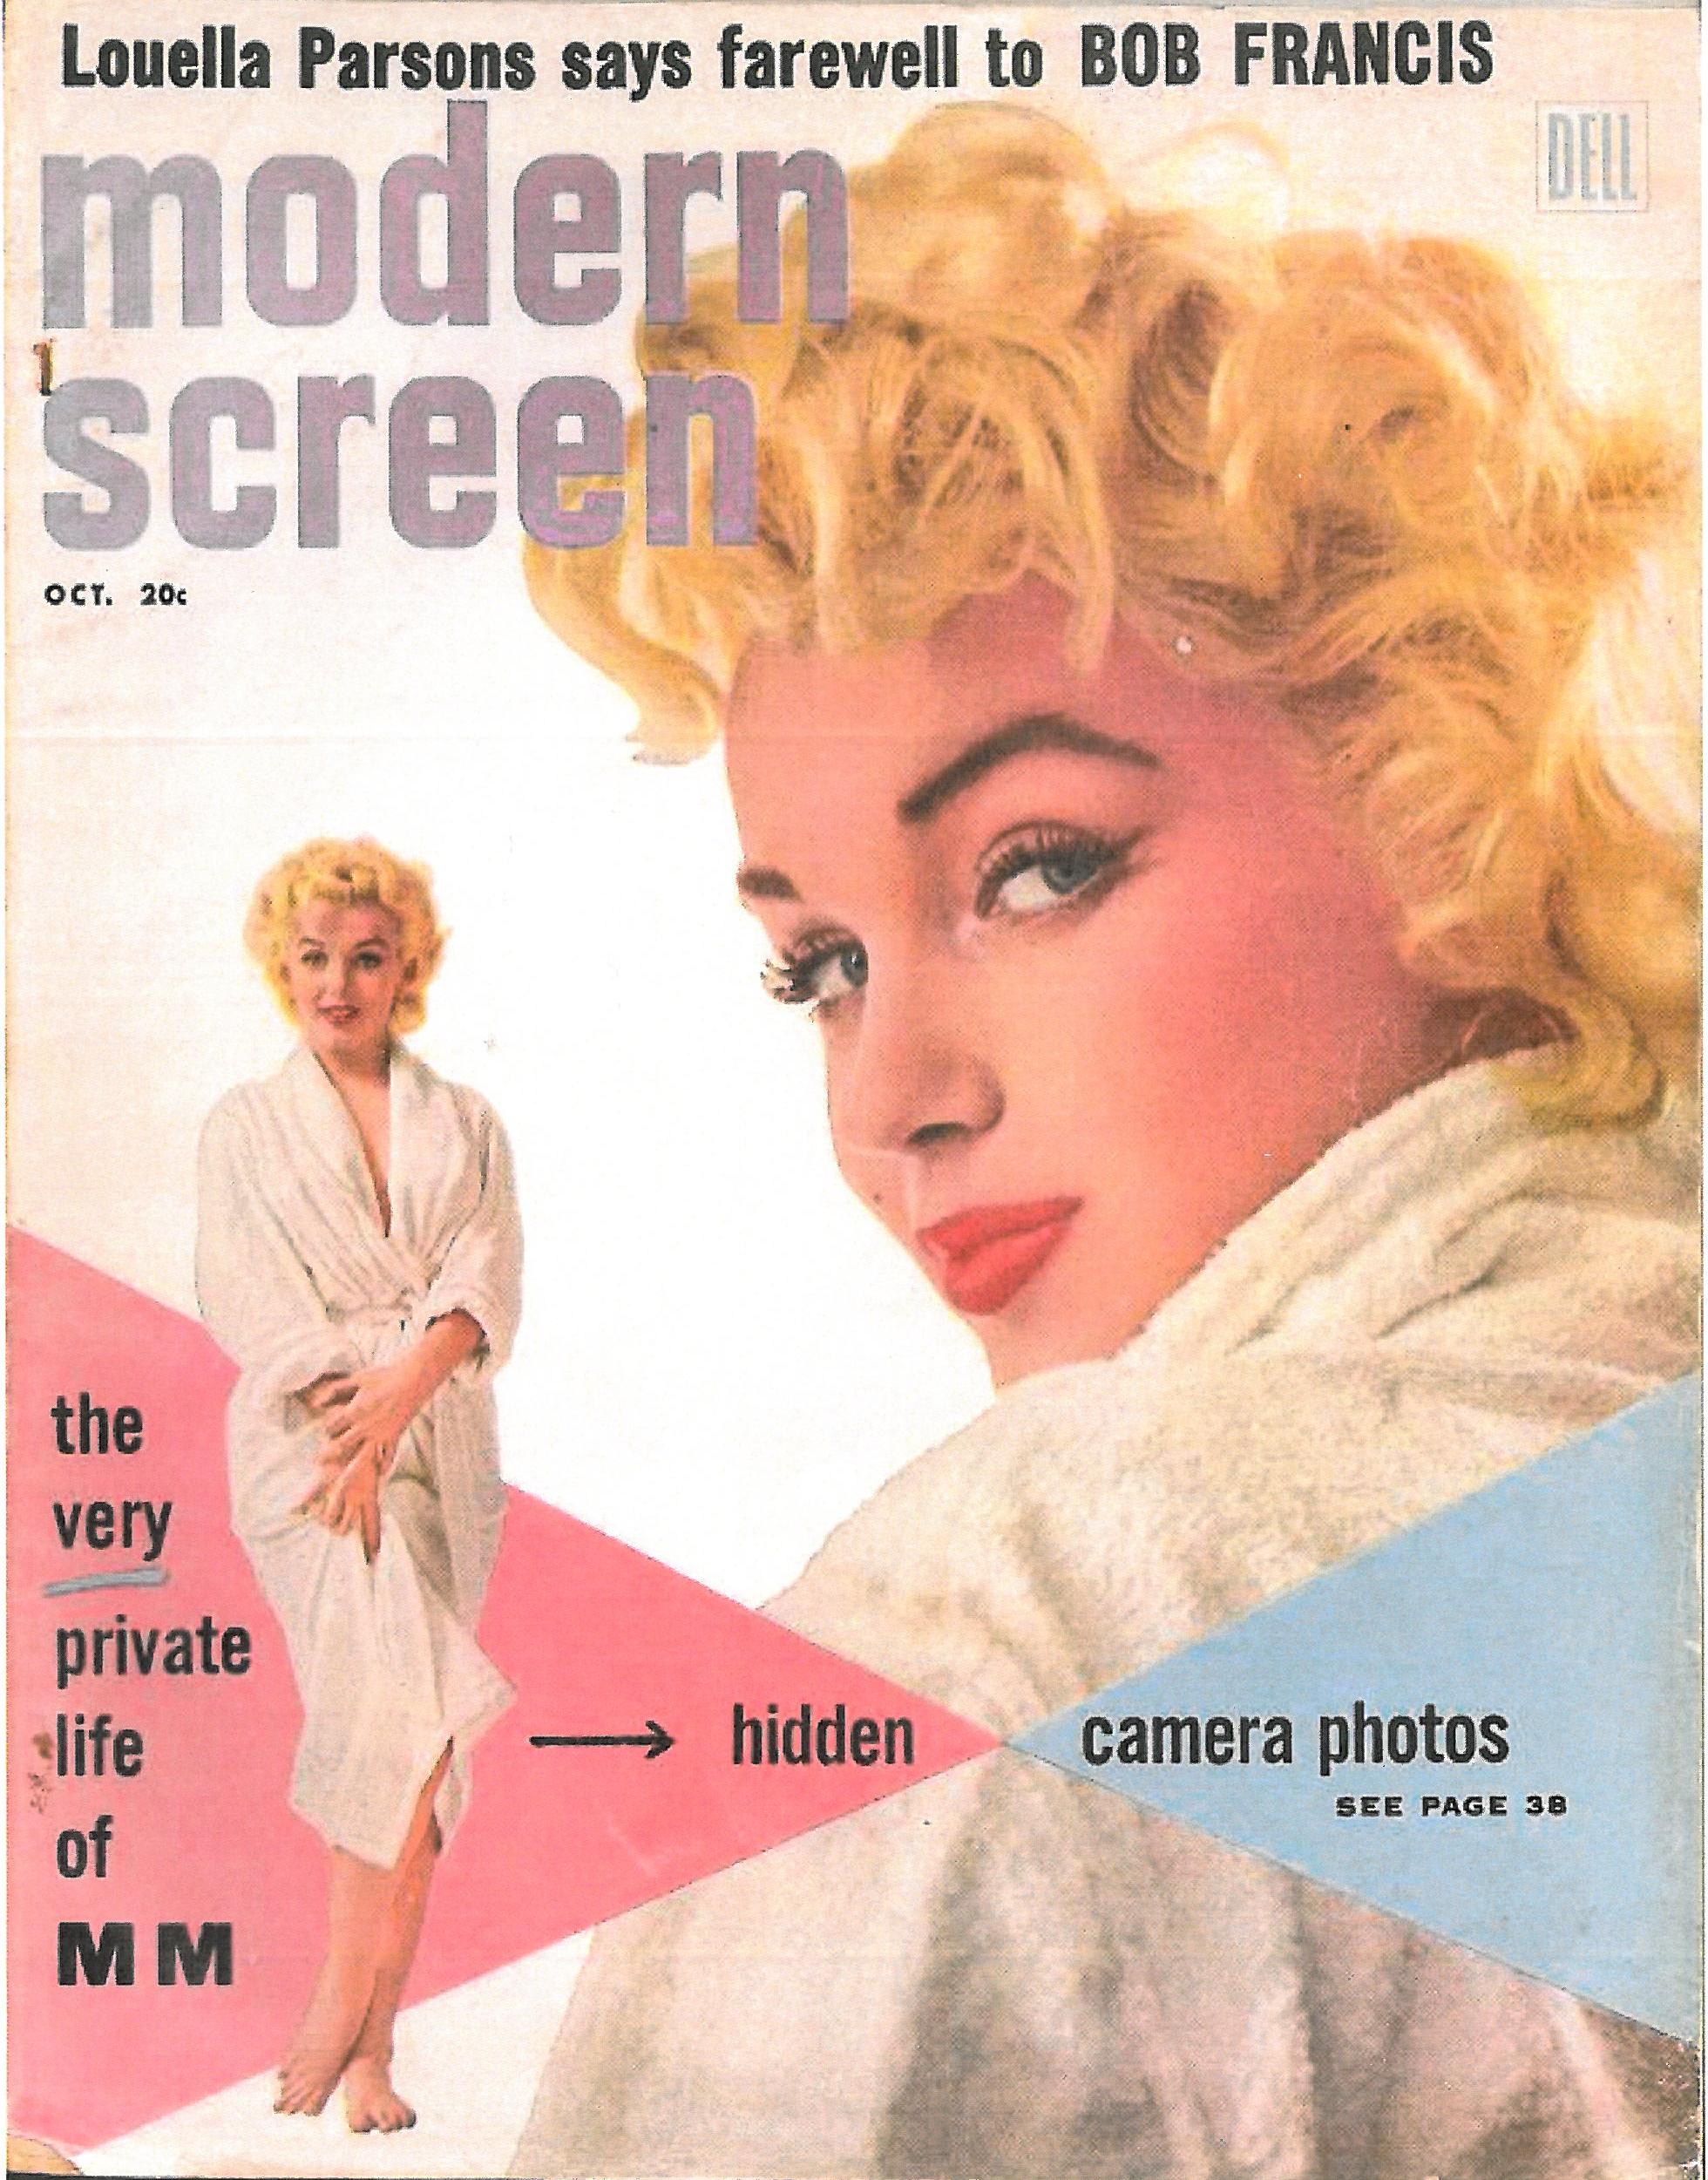   Modern Screen , Oct. 1955, available on newsstands in early Sept., about a month after Bob’s death.  Modern Screen , Nov. 1955, “Bob Francis’ Last Interview” by Alice Finletter provides a significant amount of information about Bob’s time in June 1